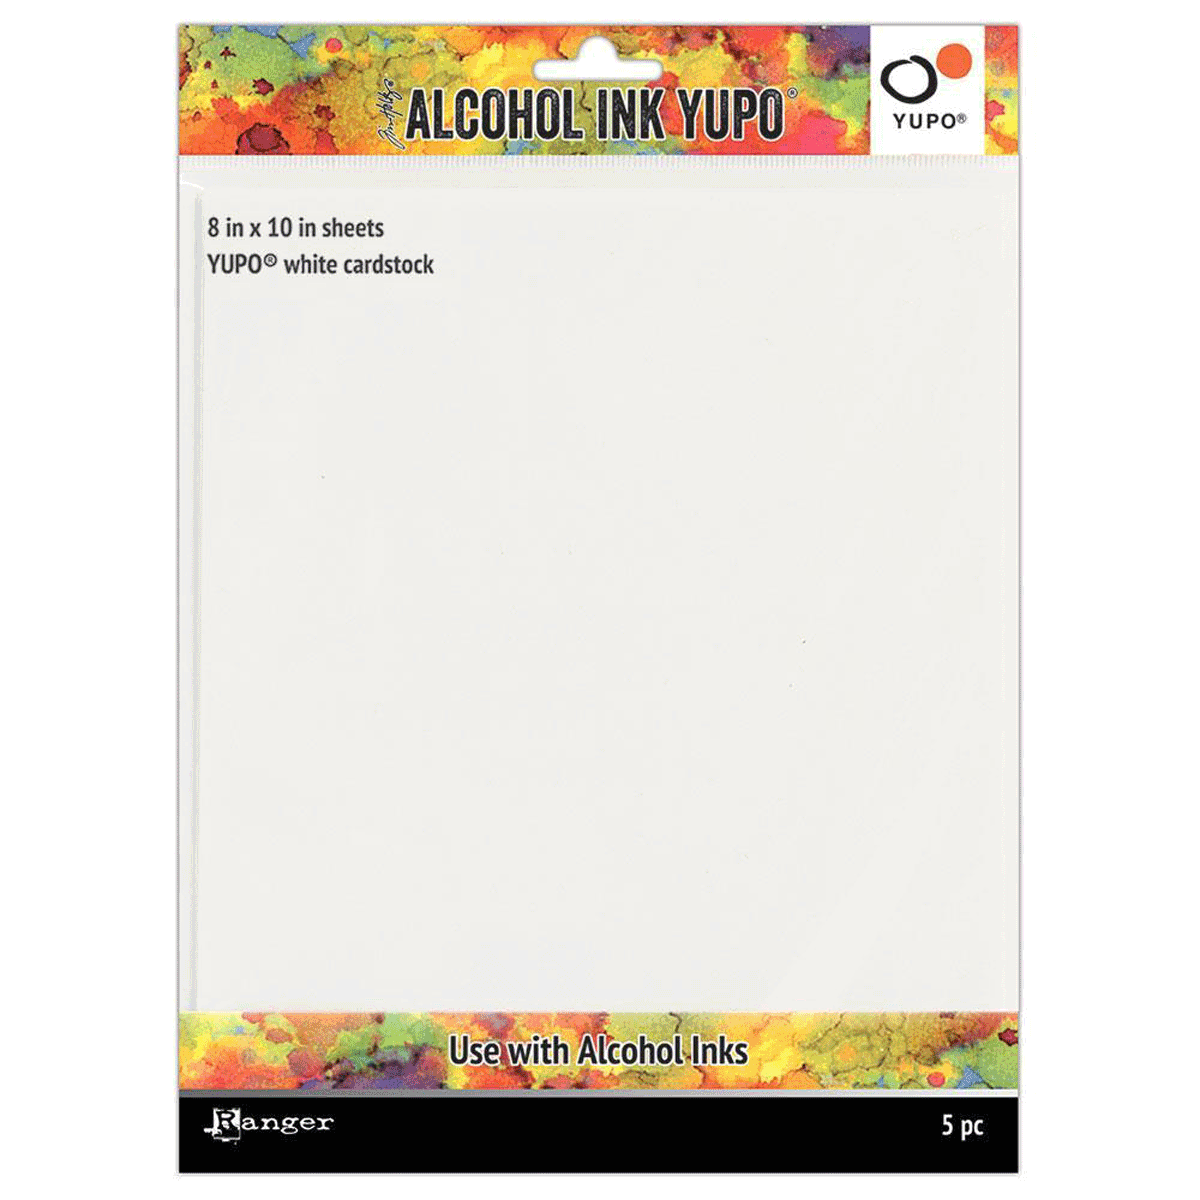 Tim Holtz Alcohol Ink Yupo White cardstock (8x10in) 5pc